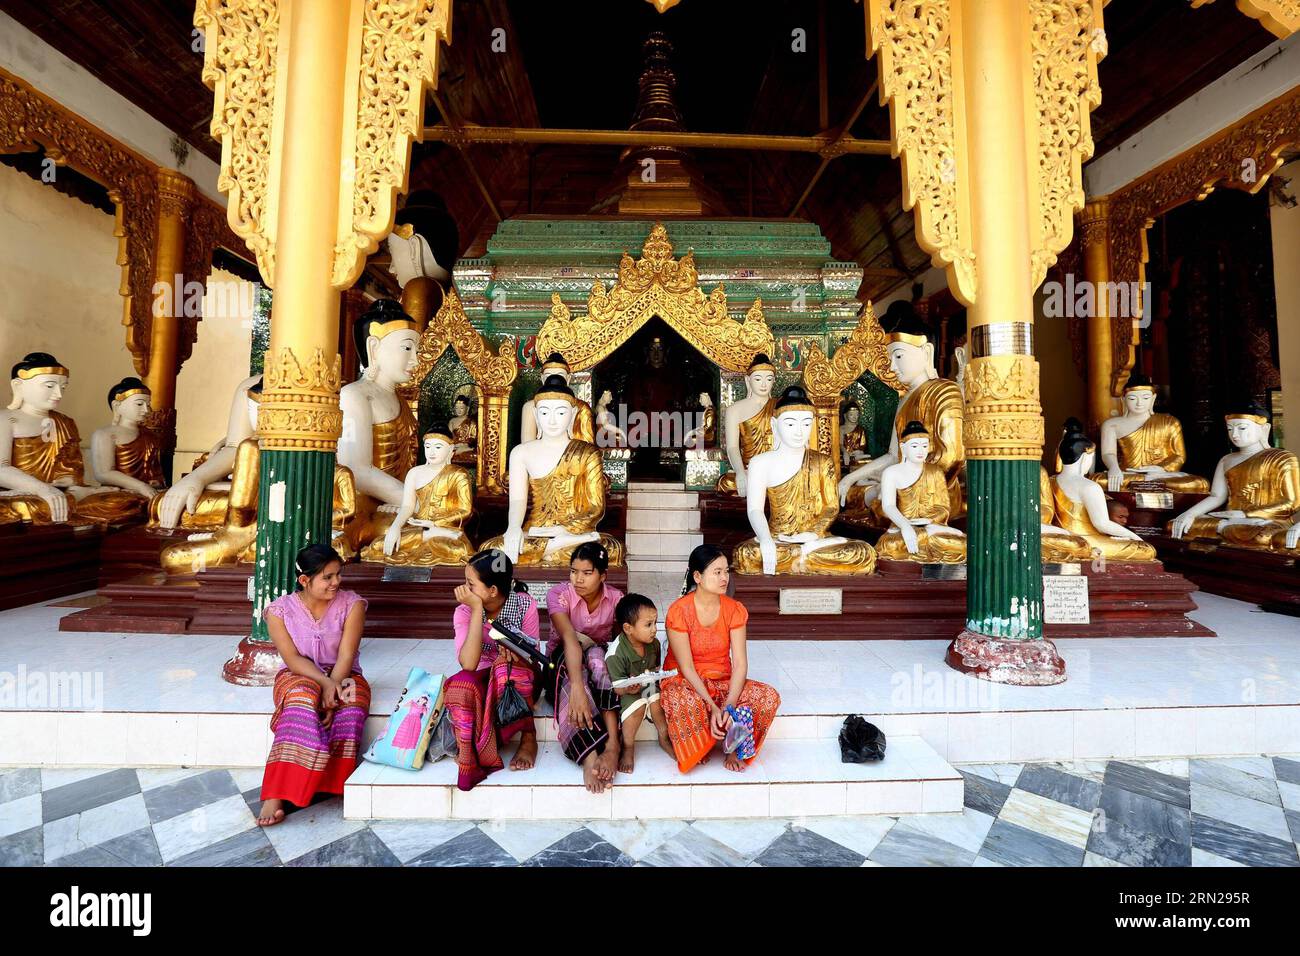 YANGON, Feb. 17, 2015 -- Visitors take a rest at the Shwedagon pagoda in Yangon, Myanmar, Feb. 17, 2015. Shwedagon Pagoda is a repository of the best of Myanmar s heritages -- architecture, sculpture and arts. It consists of hundreds of colorful temples, stupas and statues that reflect architectural styles spanning almost 2,500 years. ) MYANMAR-YANGON-SHWEDAGON PAGODA UxAung PUBLICATIONxNOTxINxCHN   Yangon Feb 17 2015 Visitors Take a Rest AT The Shwedagon Pagoda in Yangon Myanmar Feb 17 2015 Shwedagon Pagoda IS a repository of The Best of Myanmar S heritage Architecture Sculpture and Arts IT c Stock Photo